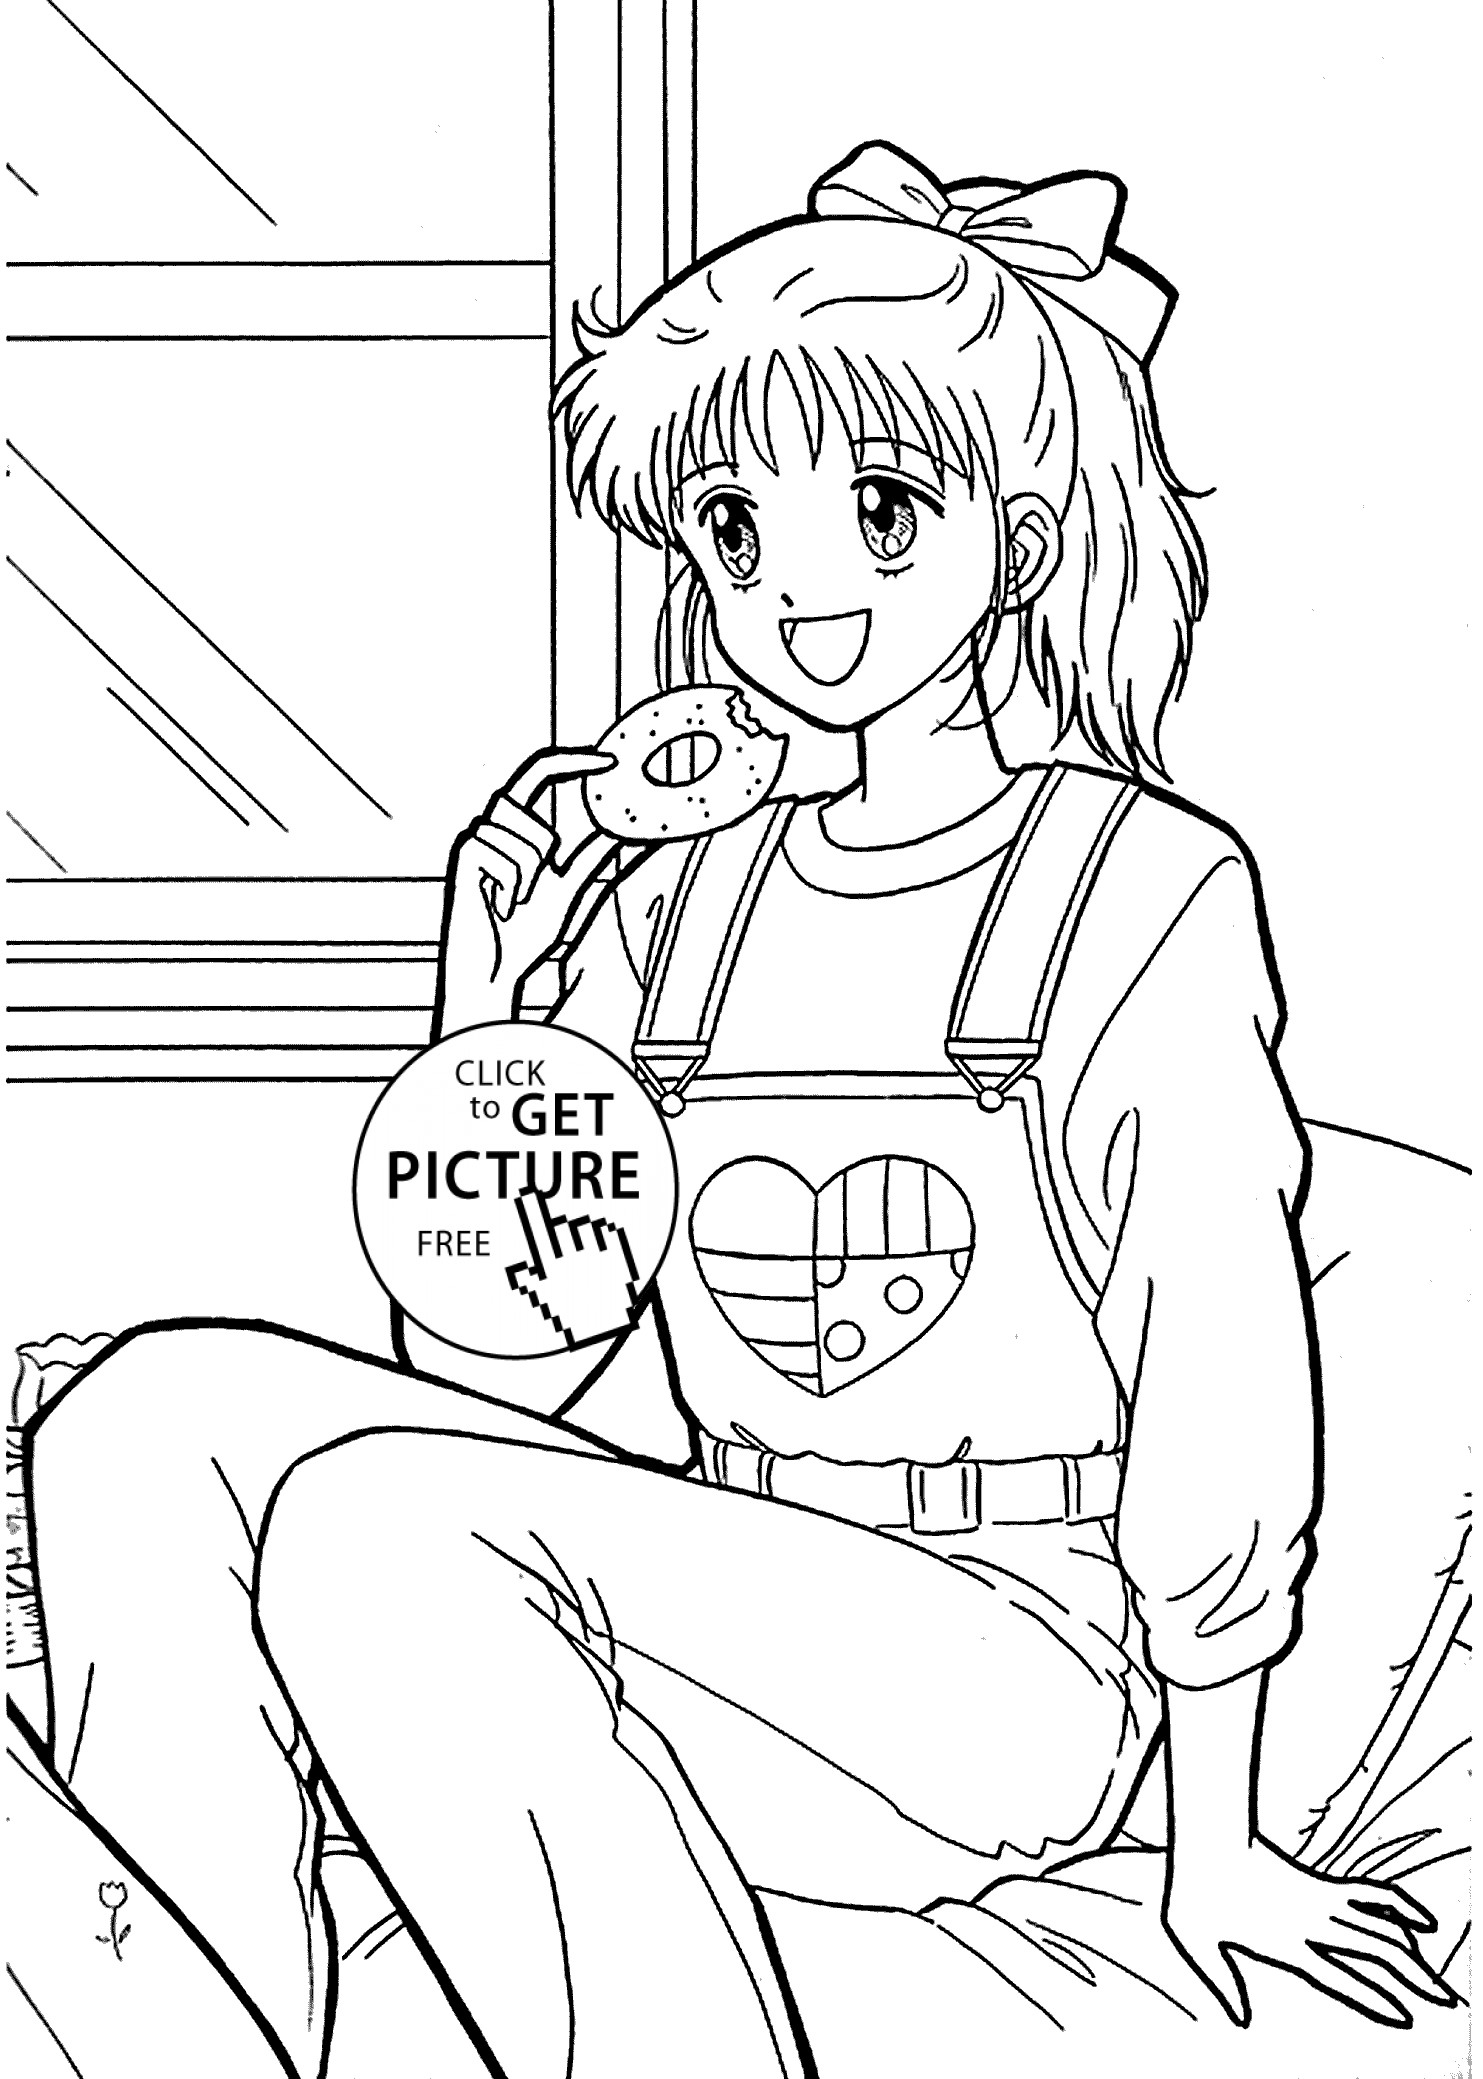 Anime Girl And Boy Coloring Pages
 Miki from Marmalade boy coloring pages for kids printable